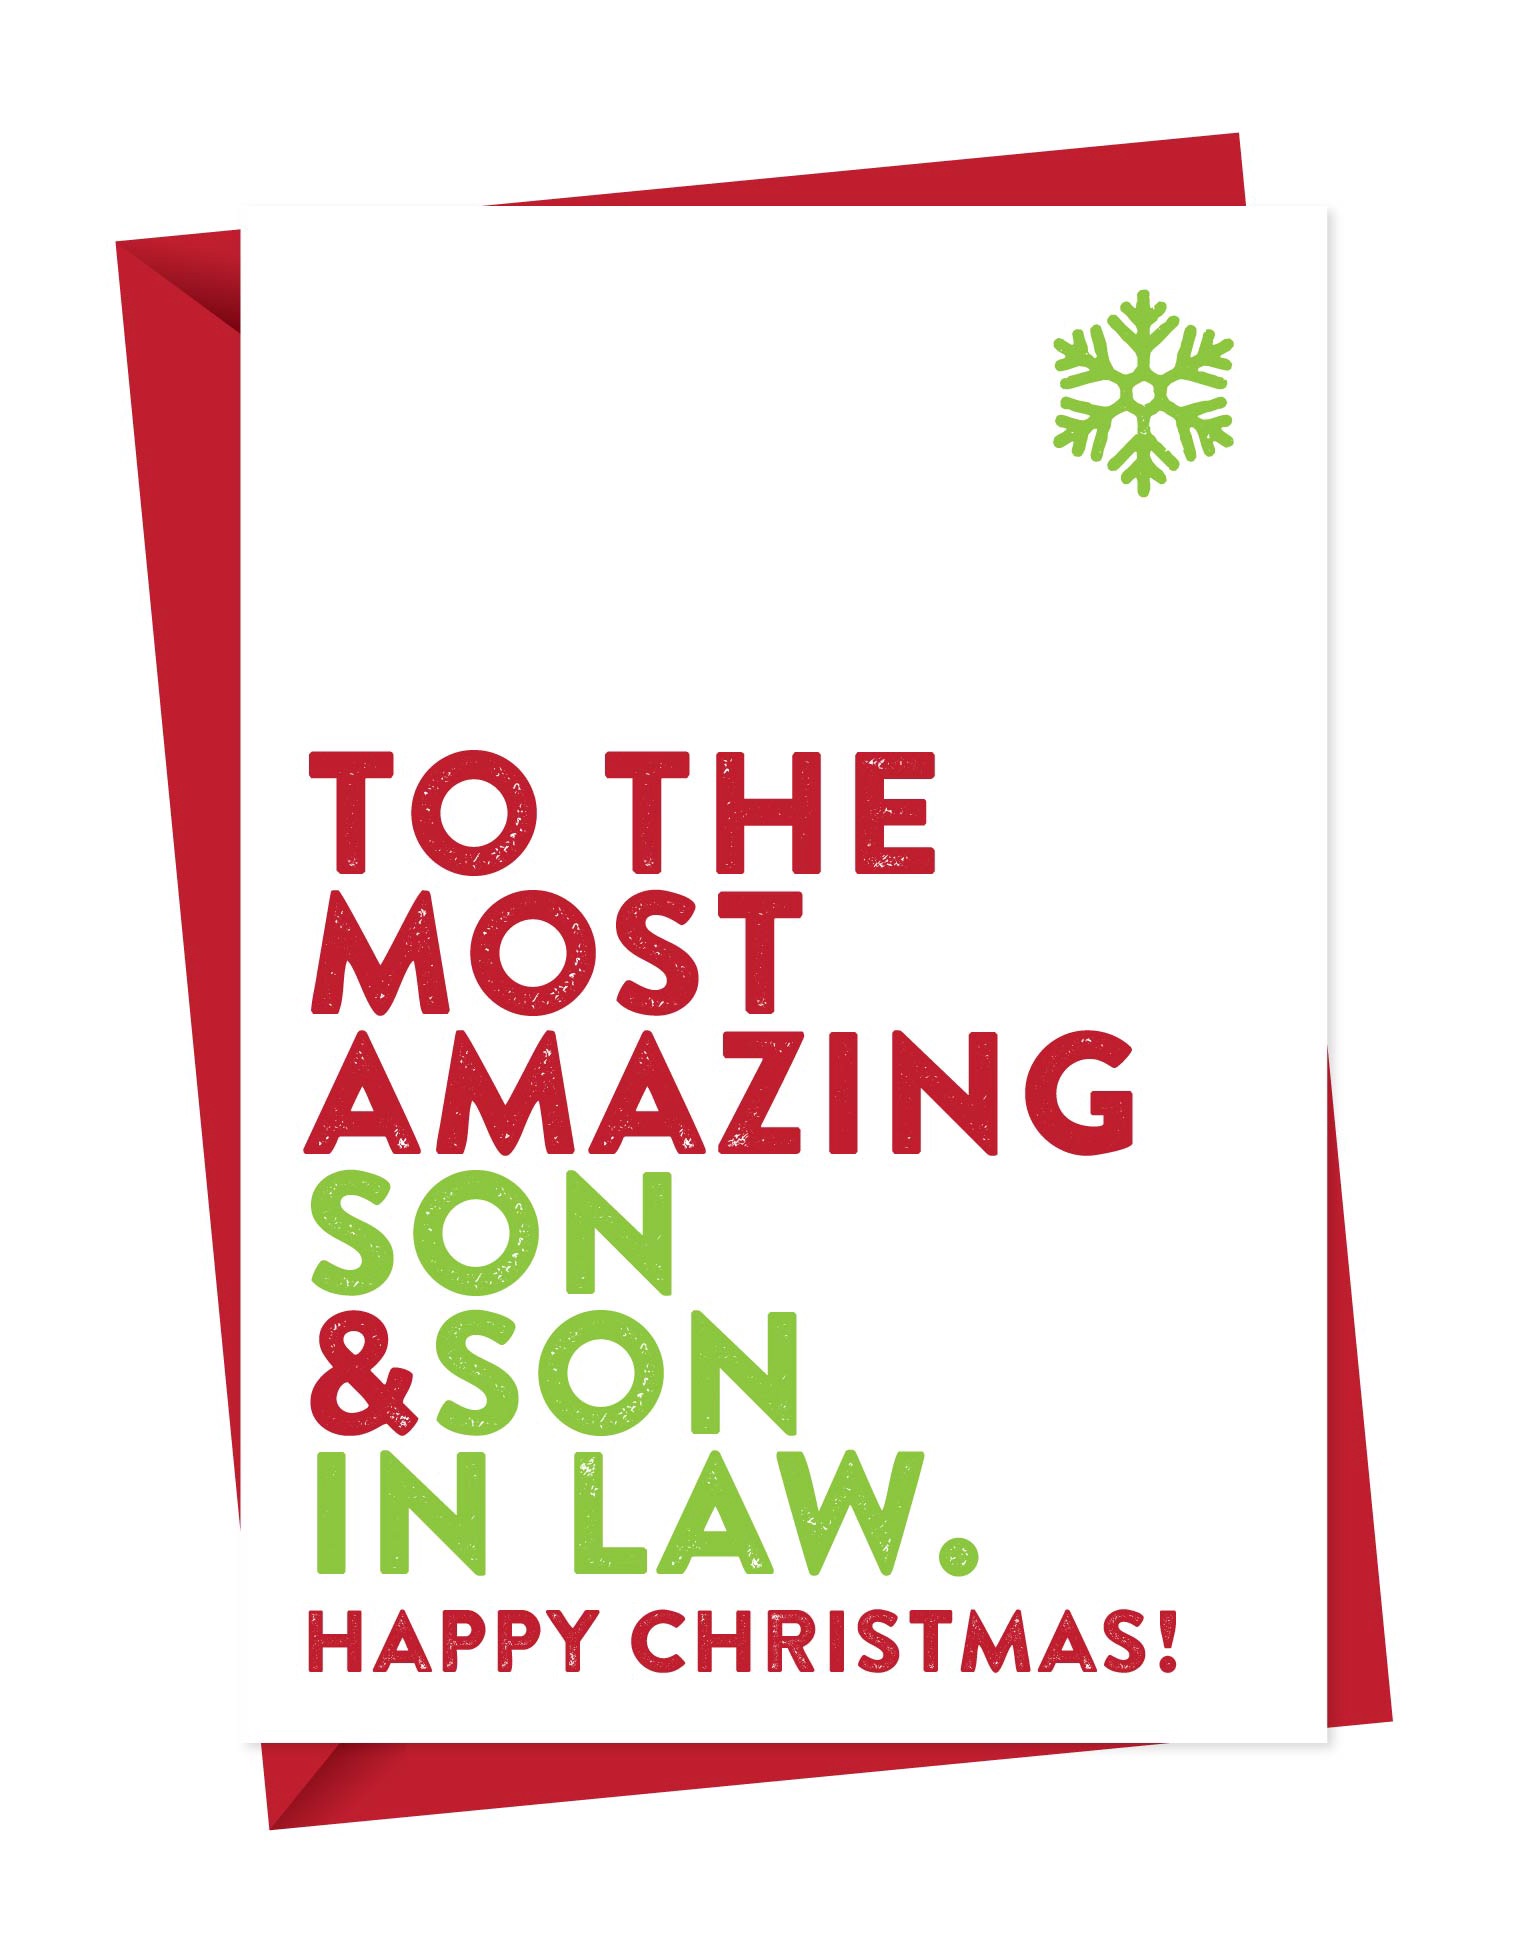 Most Amazing Son & Son in Law Christmas Card